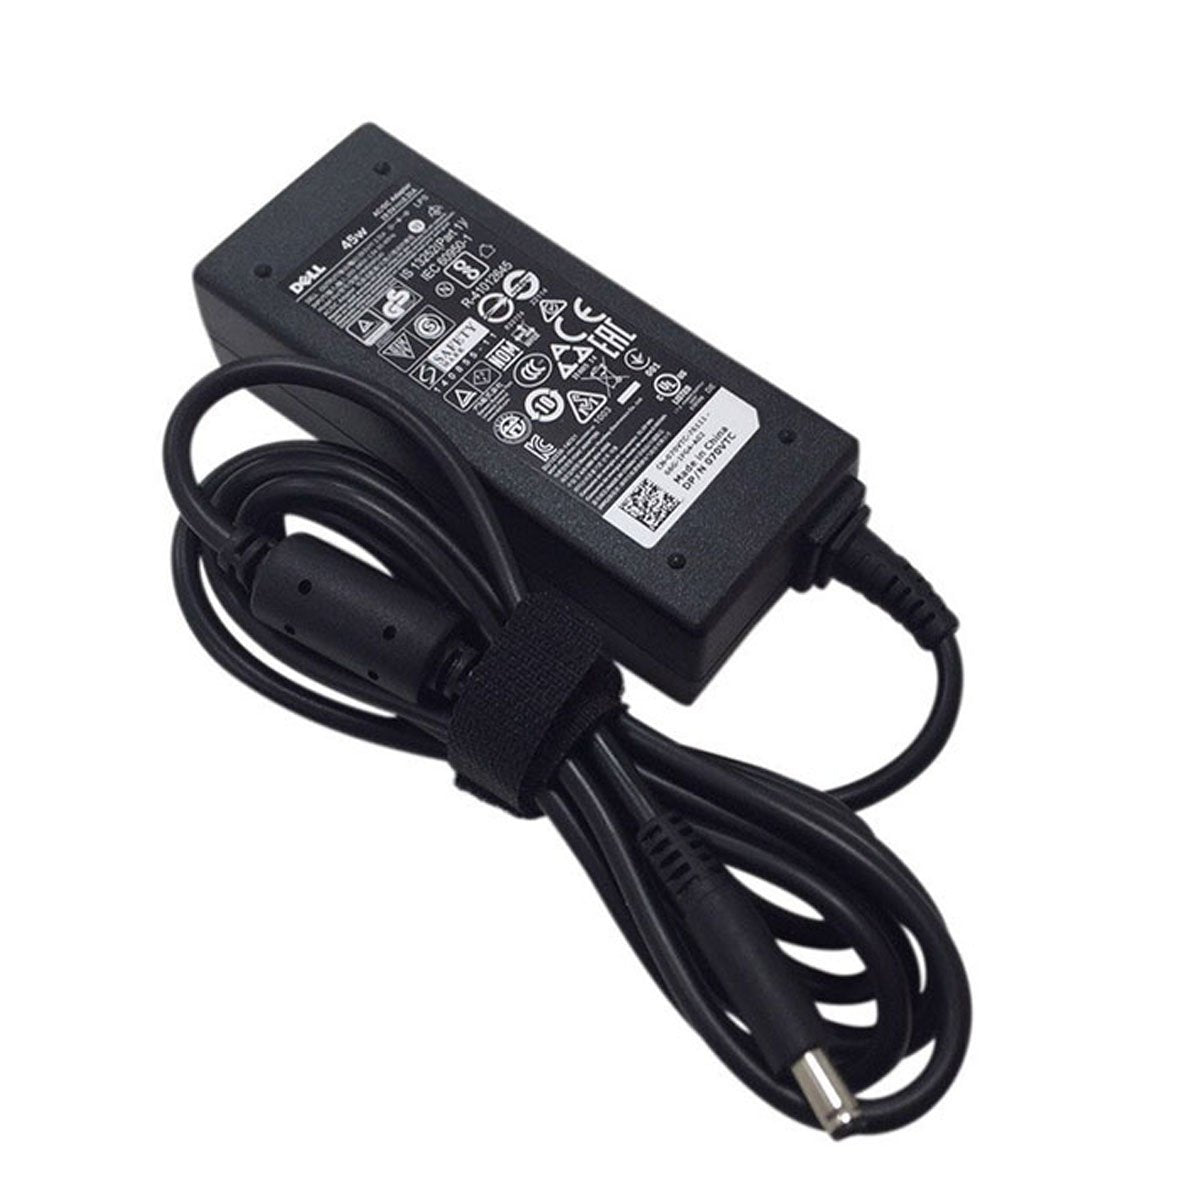 Dell Inspiron 11 3162 Original 45W Laptop Charger Adapter With Power Cord 19.5V 4.5mm Pin